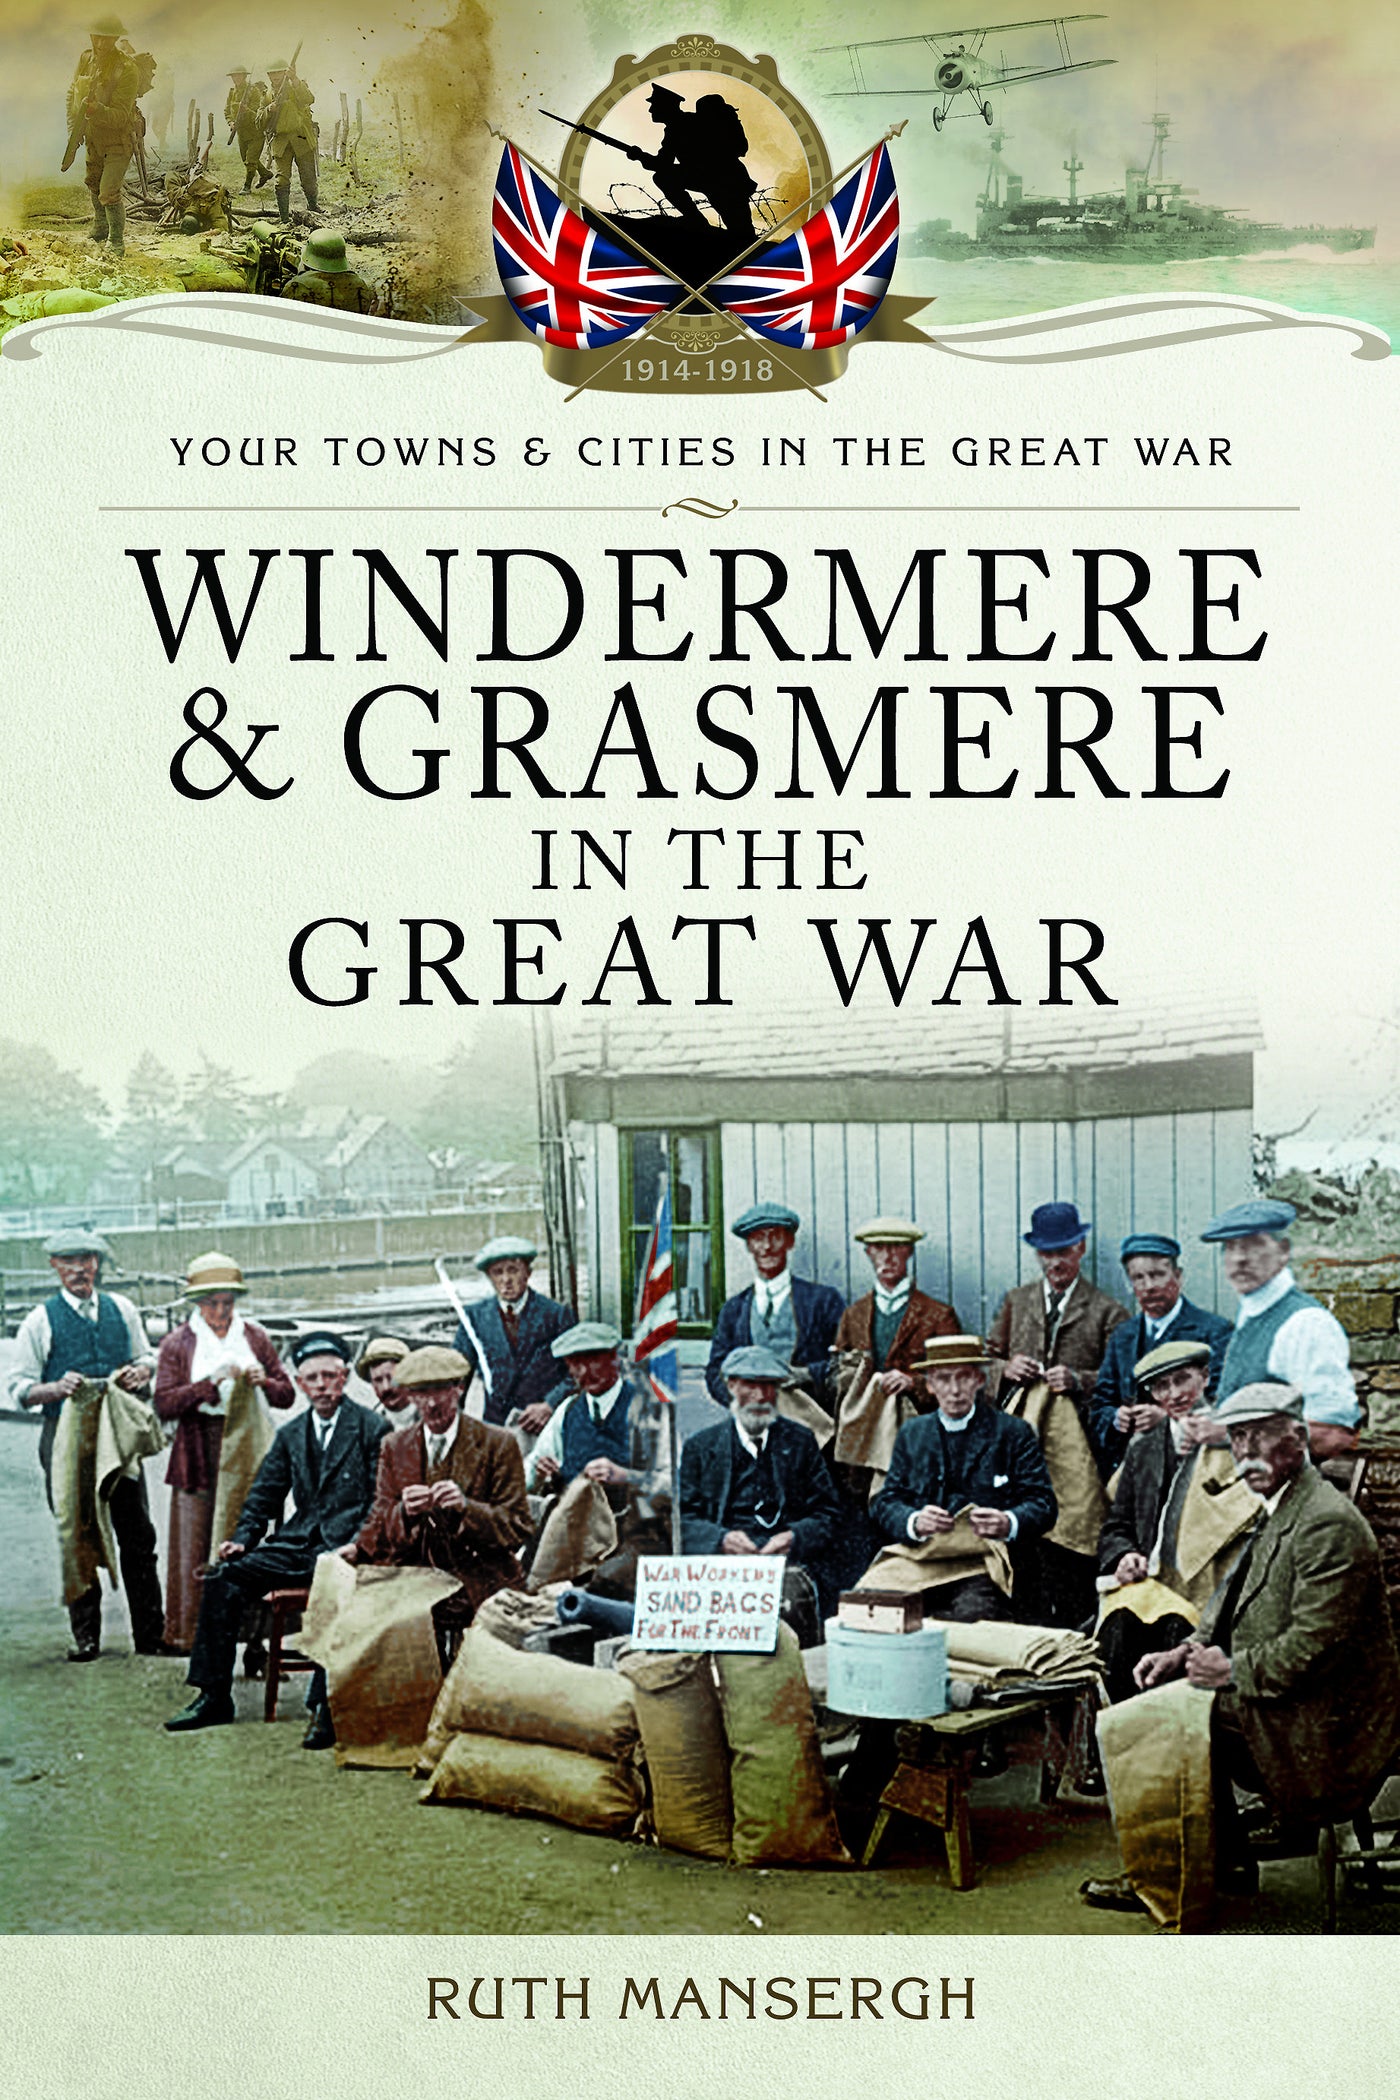 Windermere and Grasmere in the Great War